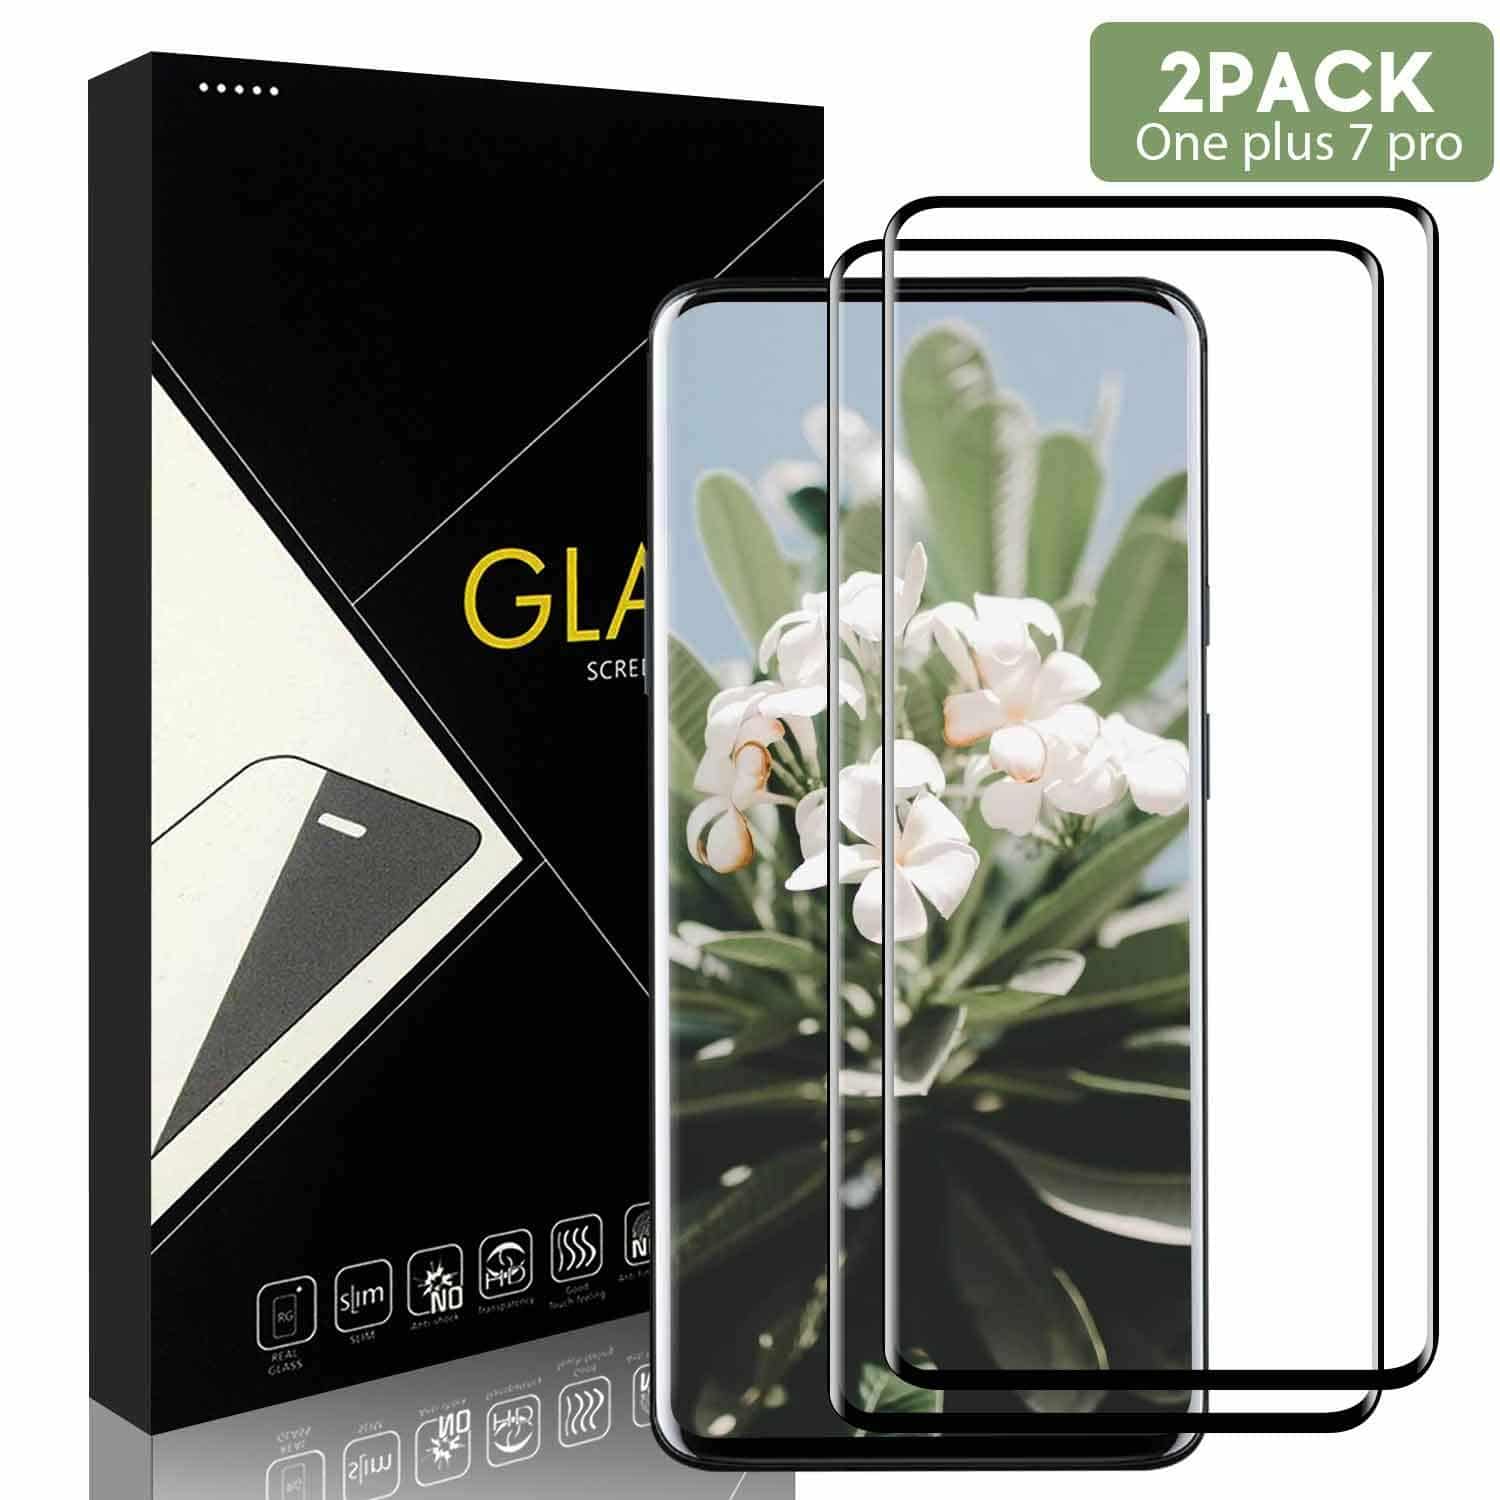 Yersan Screen Protector for OnePlus 7 Pro